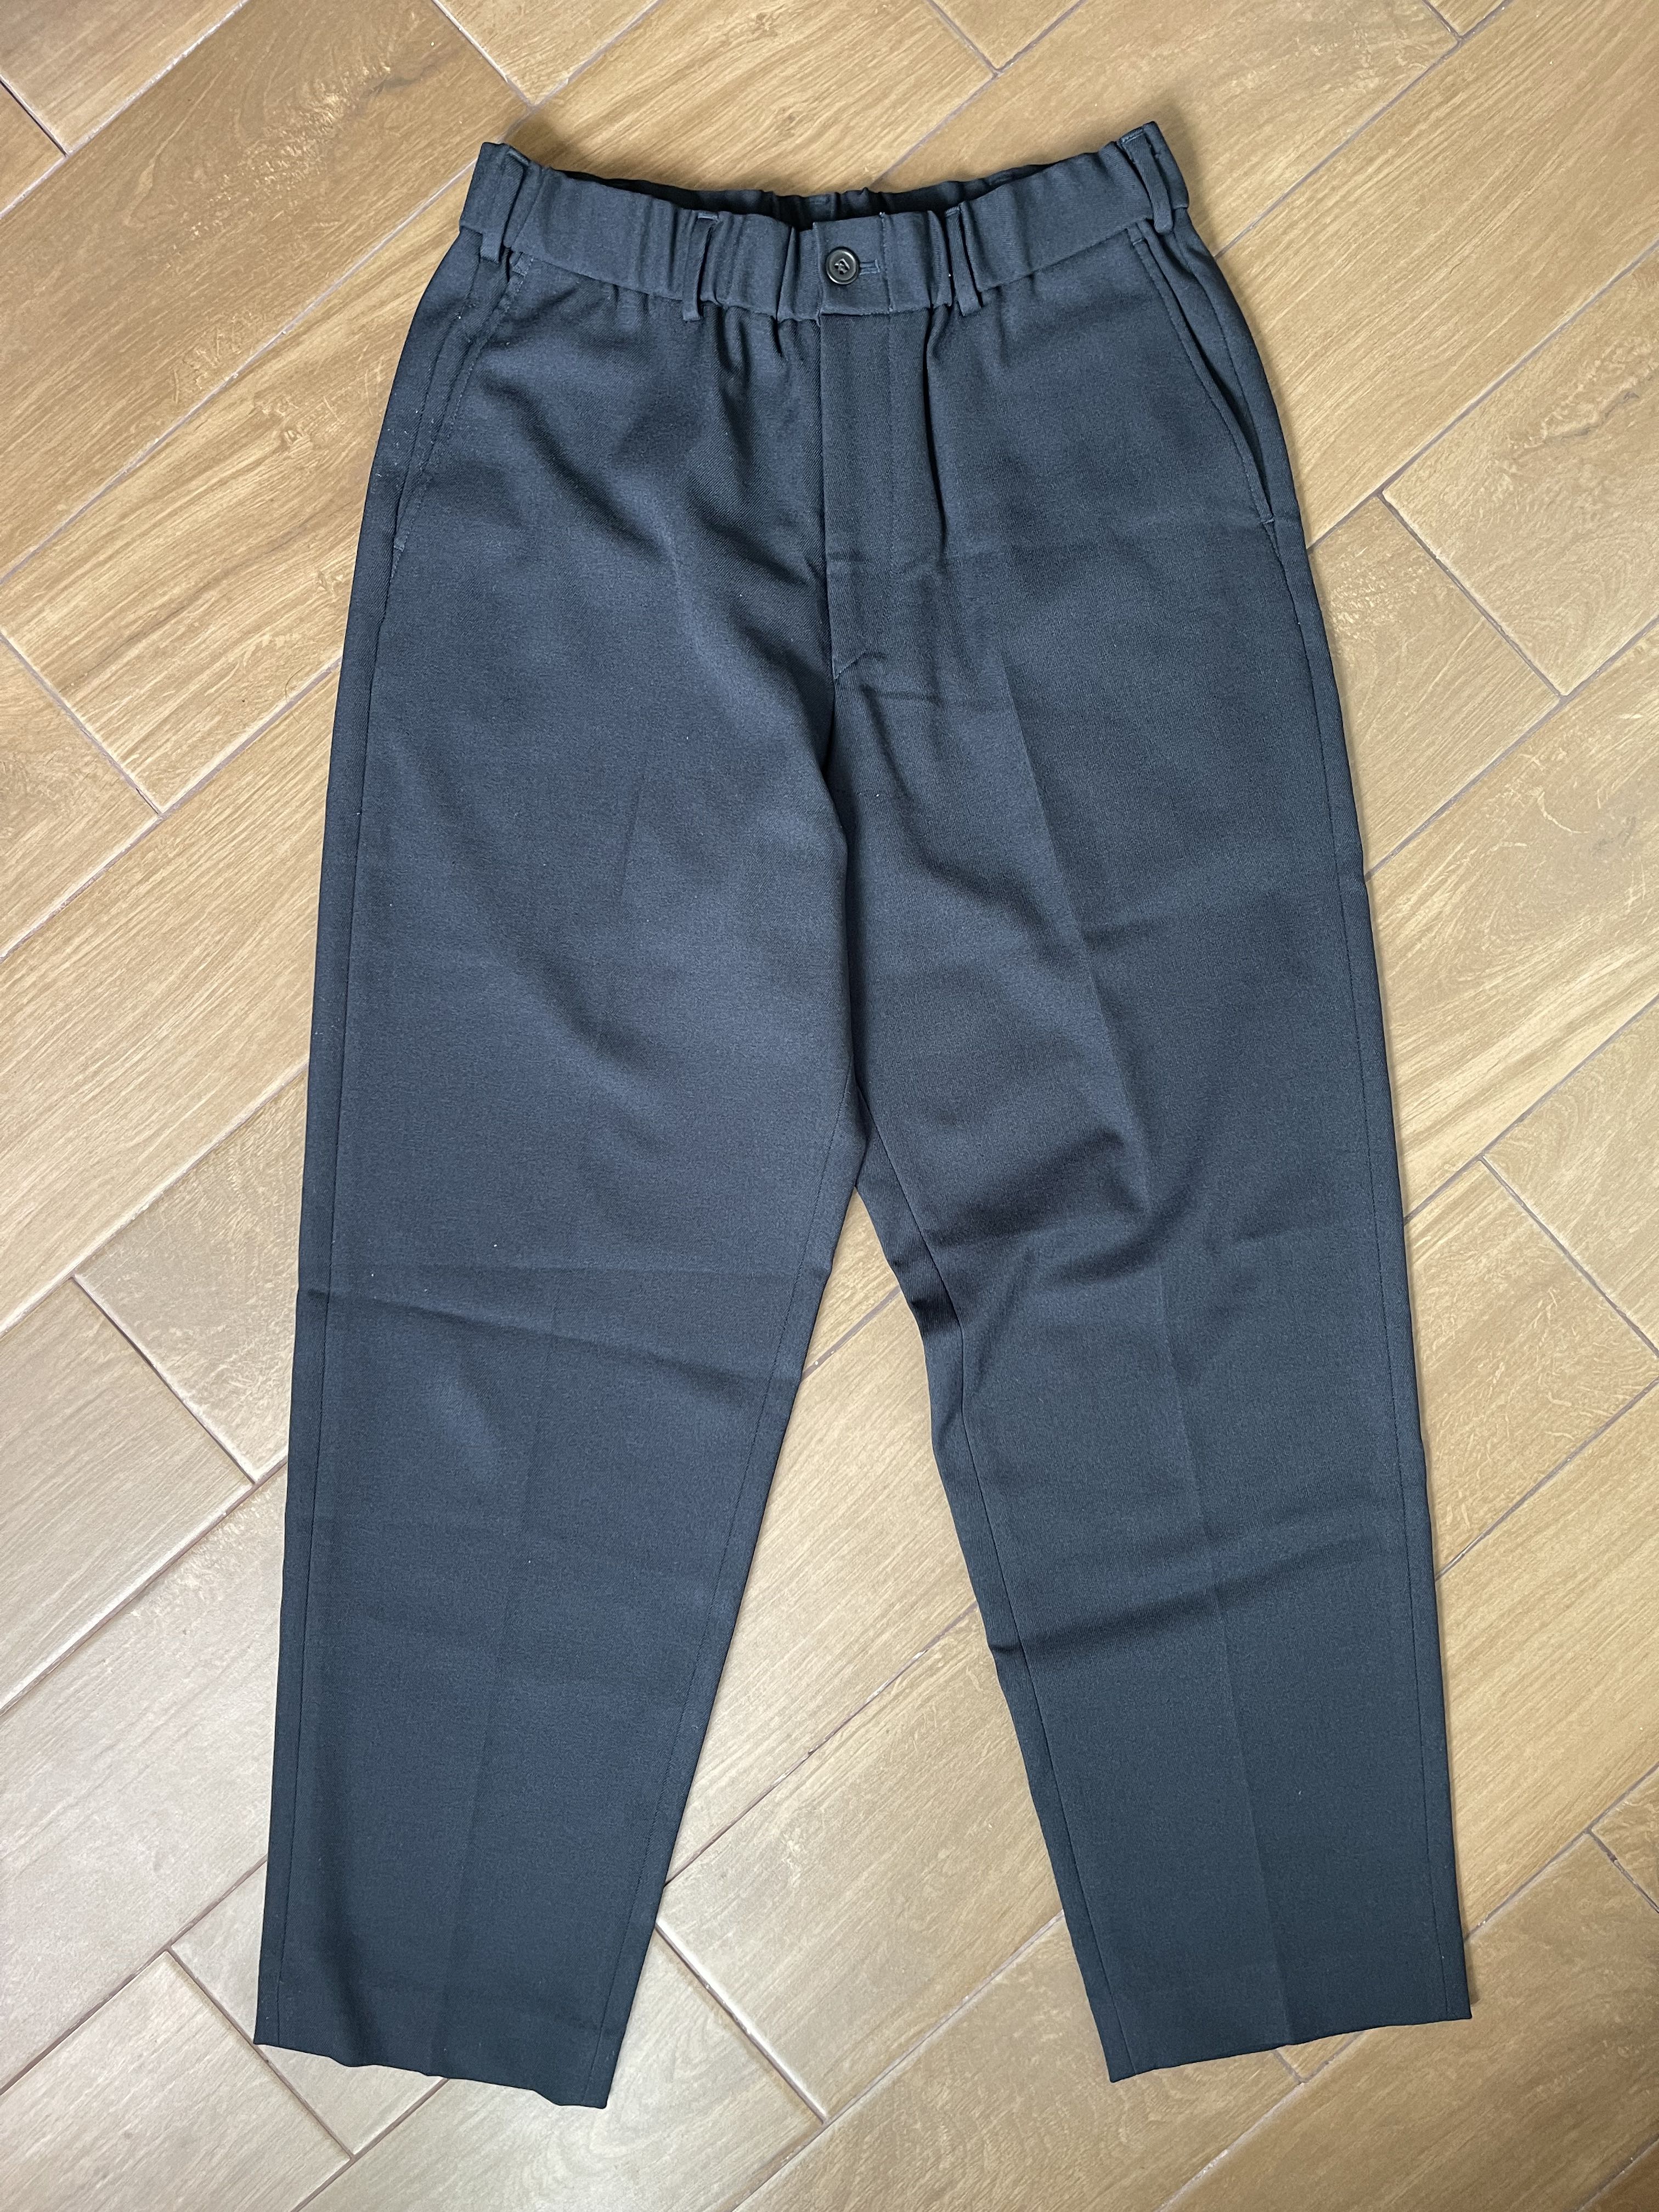 Uniqlo U wide fit tapered pants FW20, Men's Fashion, Bottoms, Trousers ...